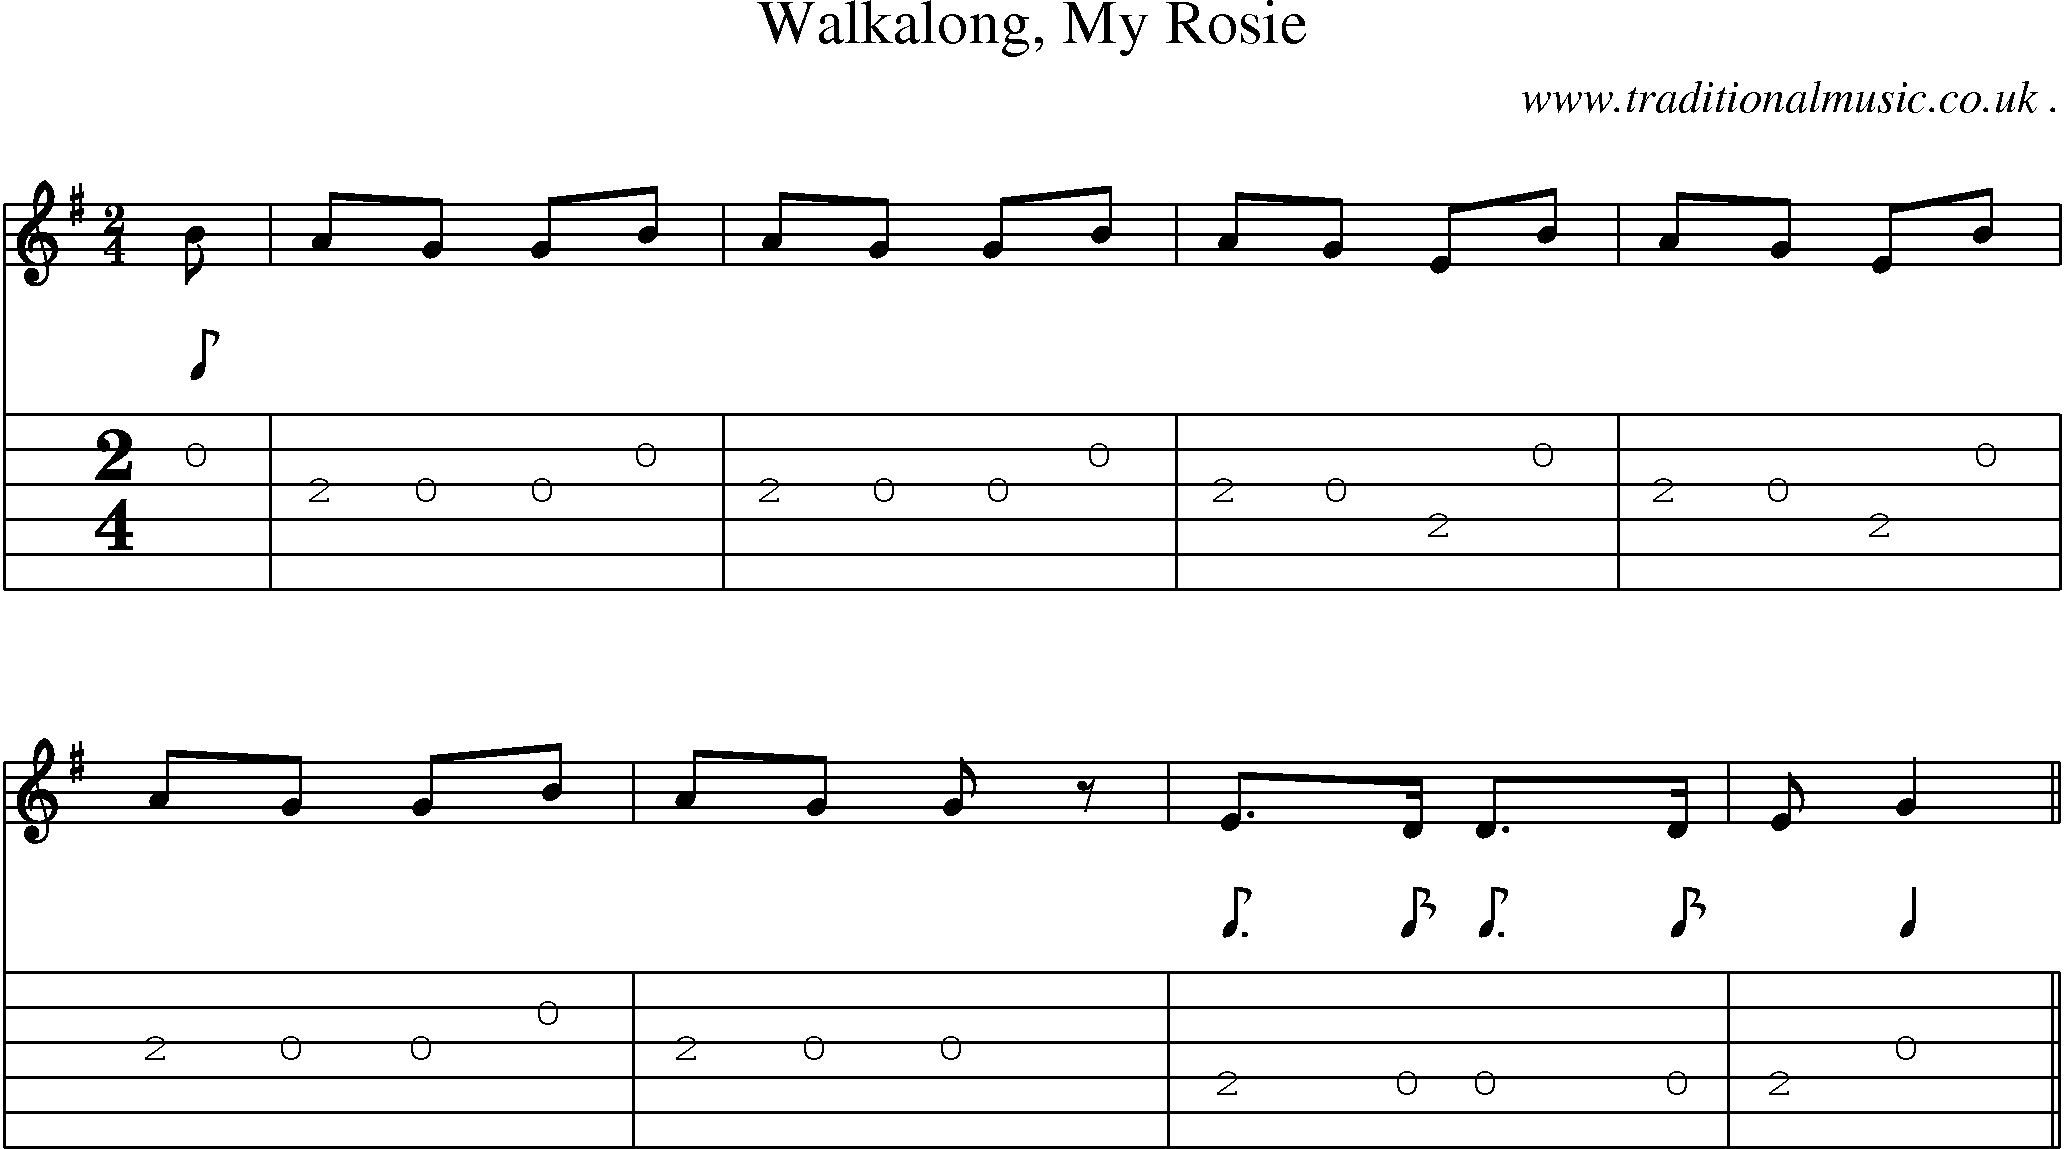 Sheet-Music and Guitar Tabs for Walkalong My Rosie